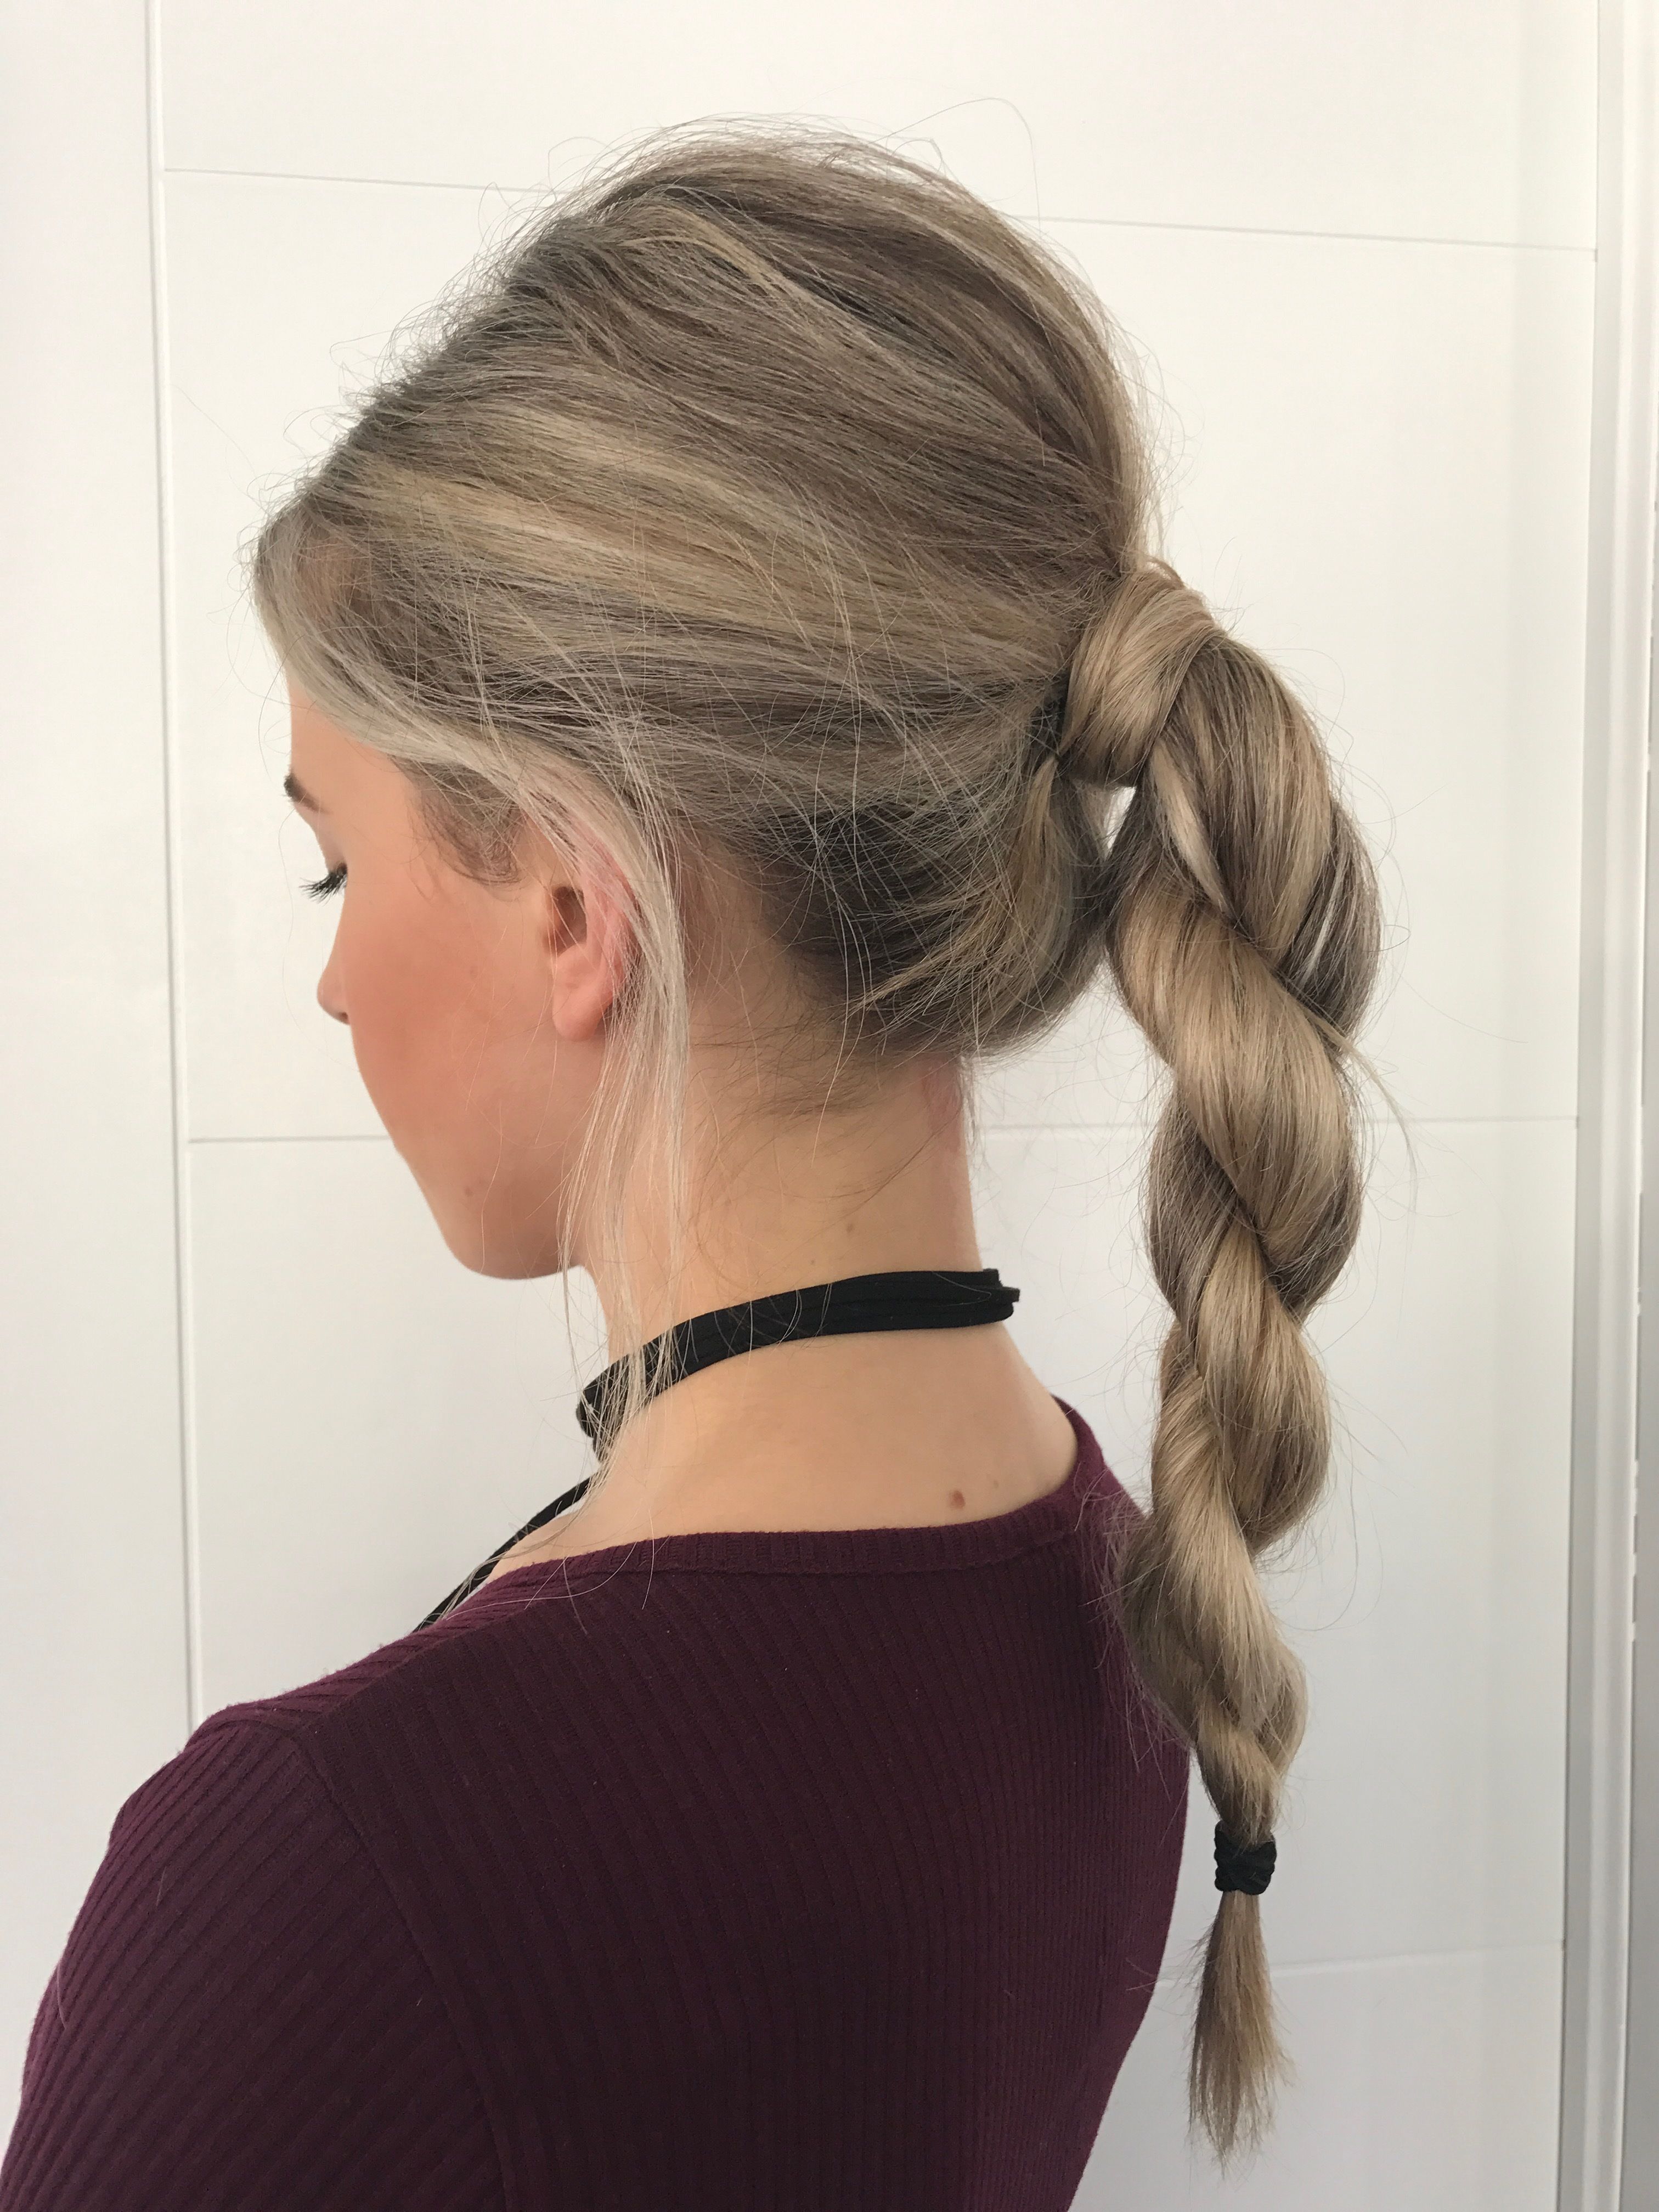 Most Current High Rope Braid Hairstyles Within 7 Cute & Easy Hairstyles For The Gym – Pureology (View 10 of 20)